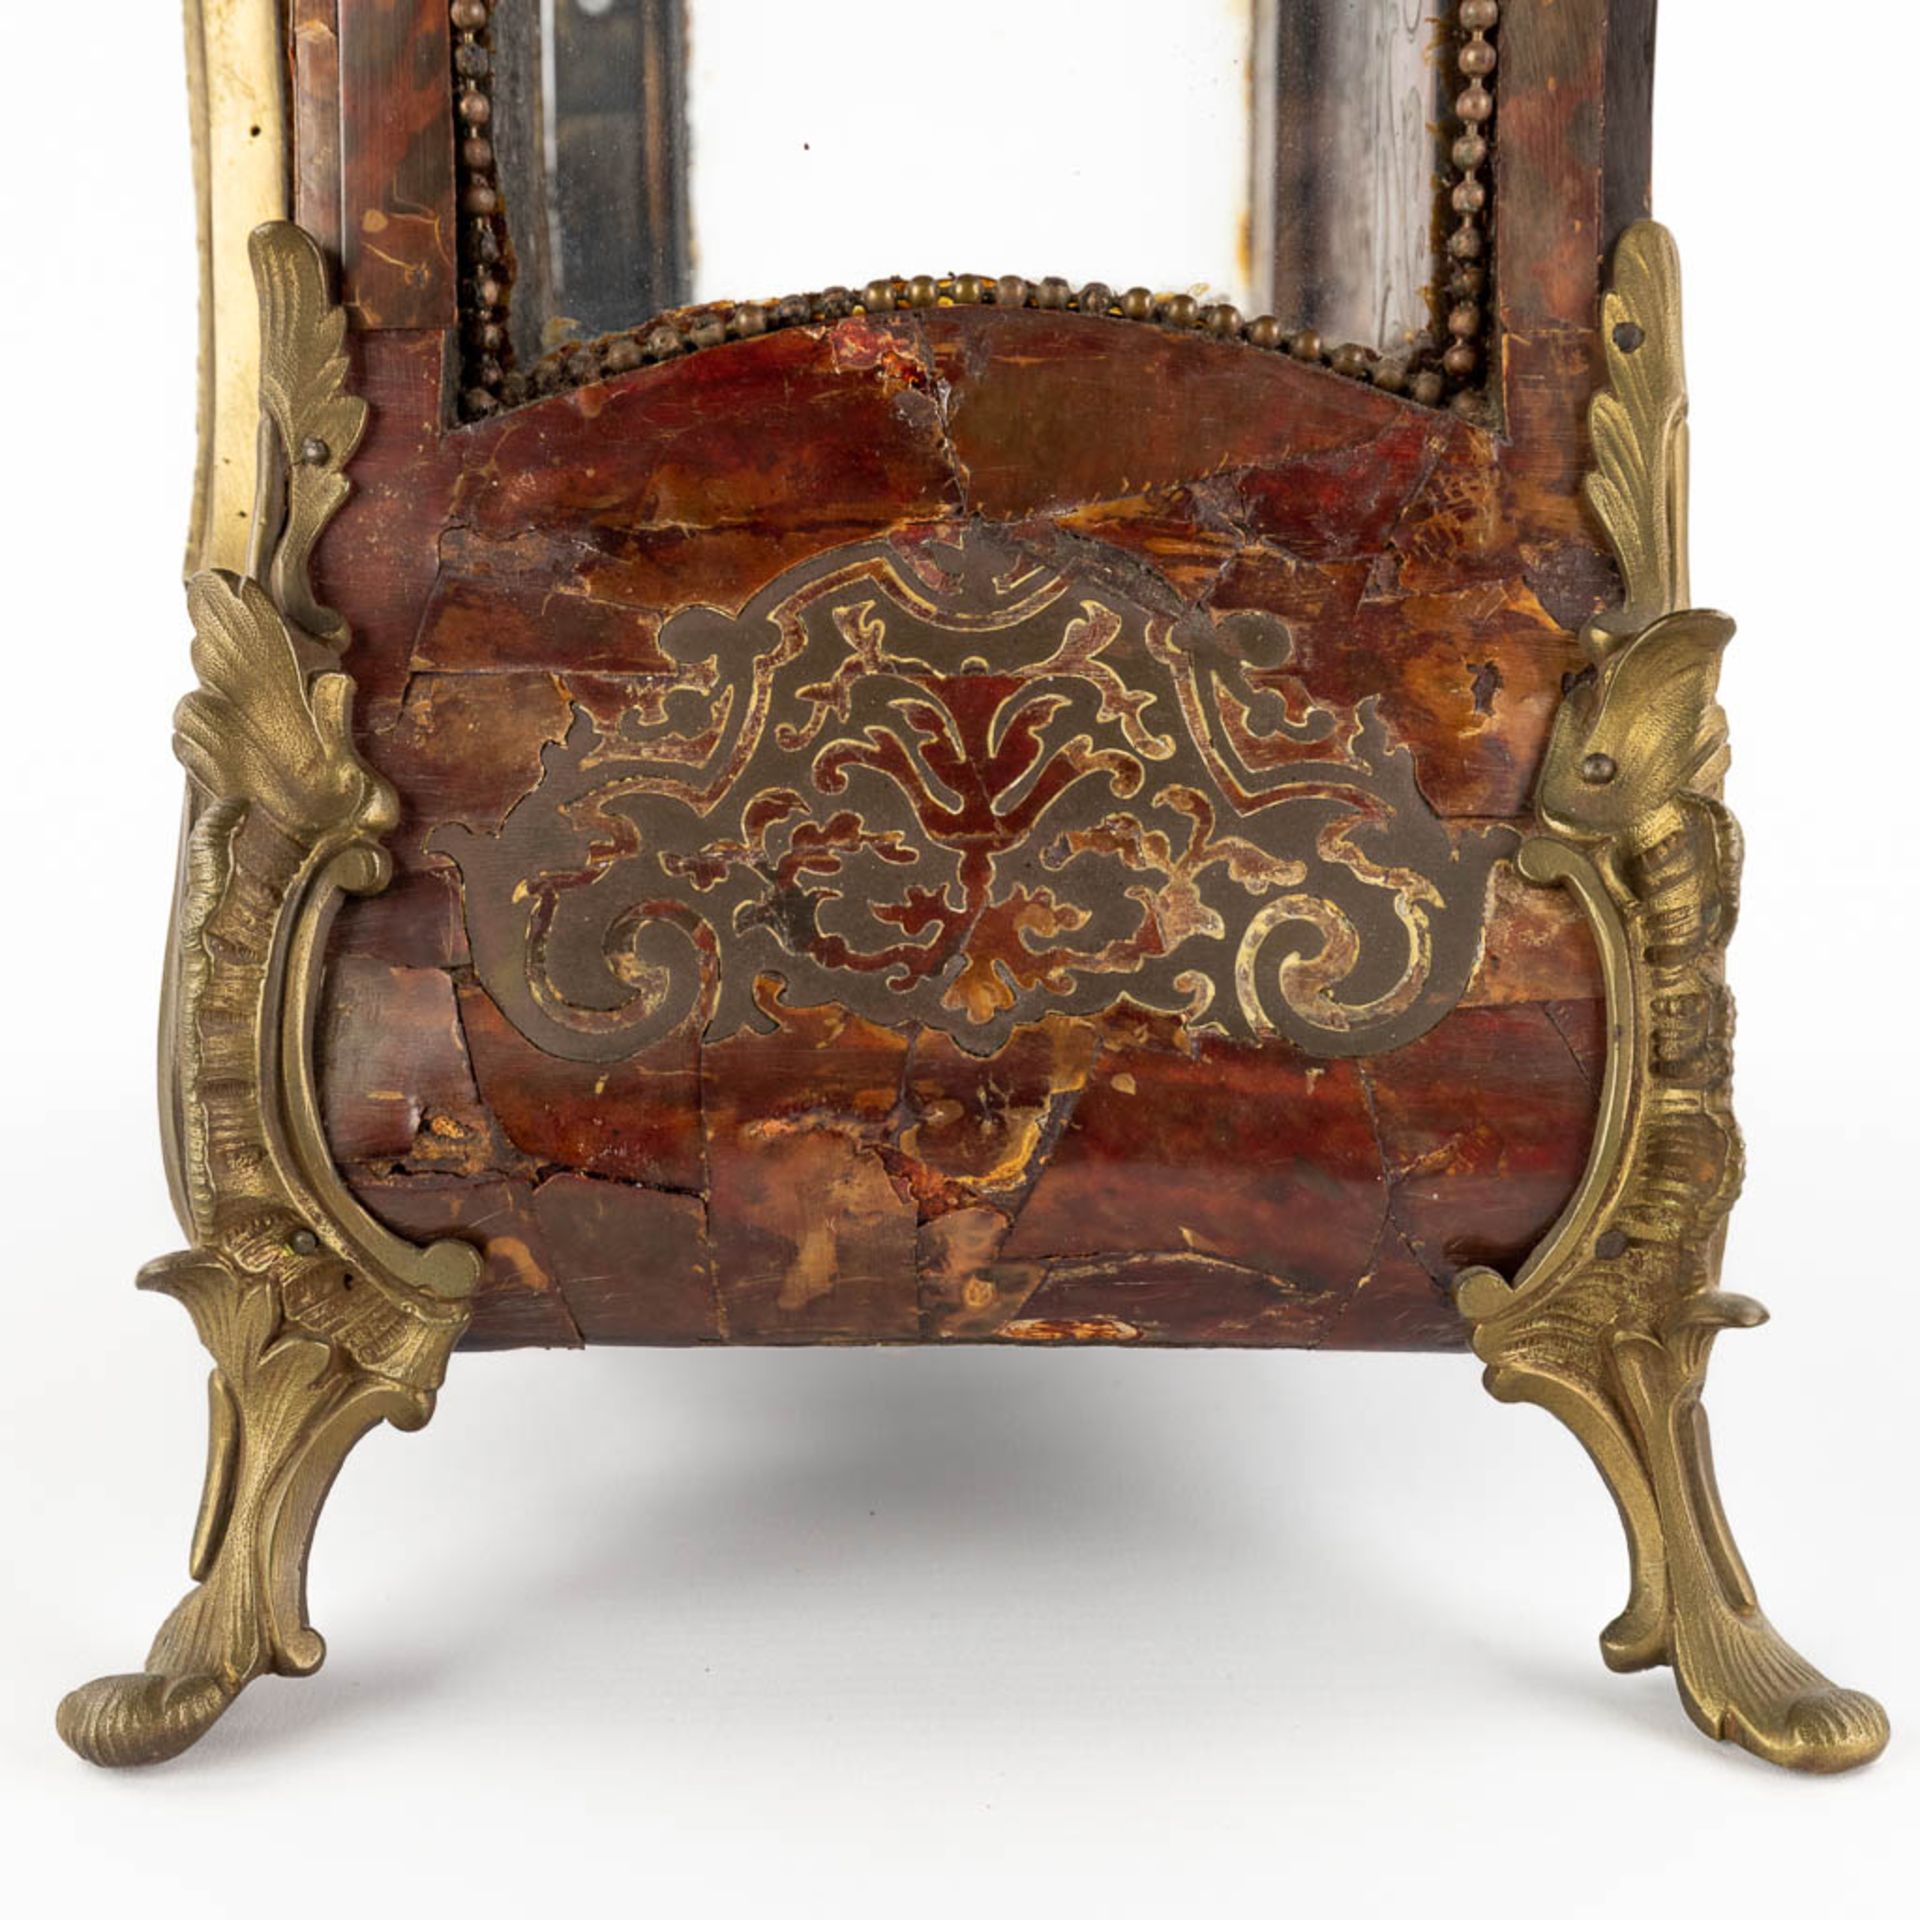 An antique mantle clock, tortoiseshell and copper inlay, early 20th C. (D:18 x W:38 x H:65 cm) - Bild 10 aus 15